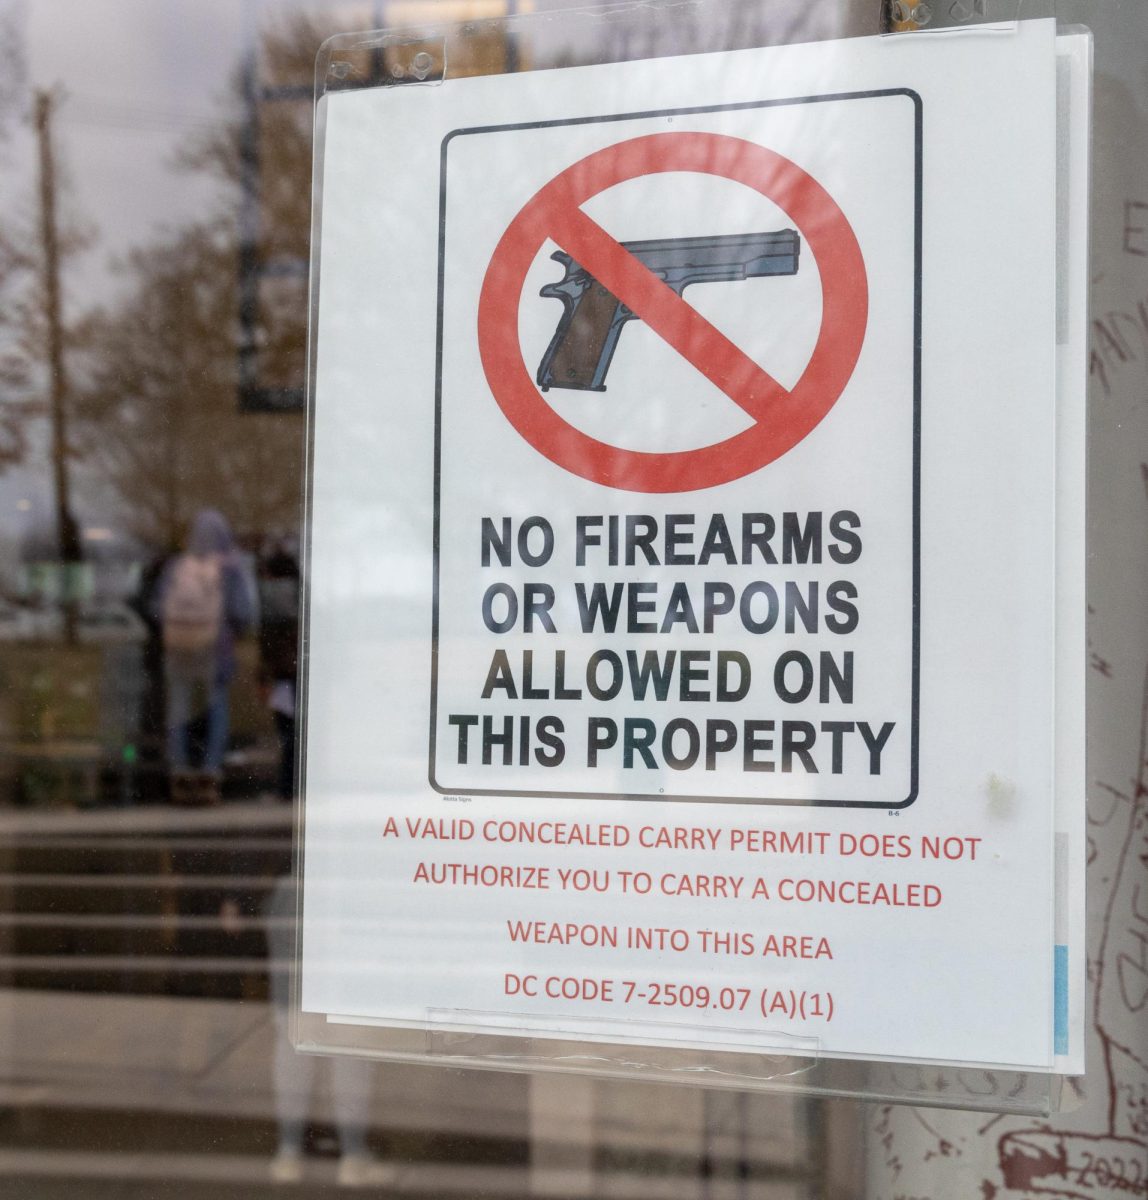 SAFETY FIRST - A sign in front of JR reminds the community that DC prohibits bringing guns into public
schools. This policy was implemented to ensure student safety.